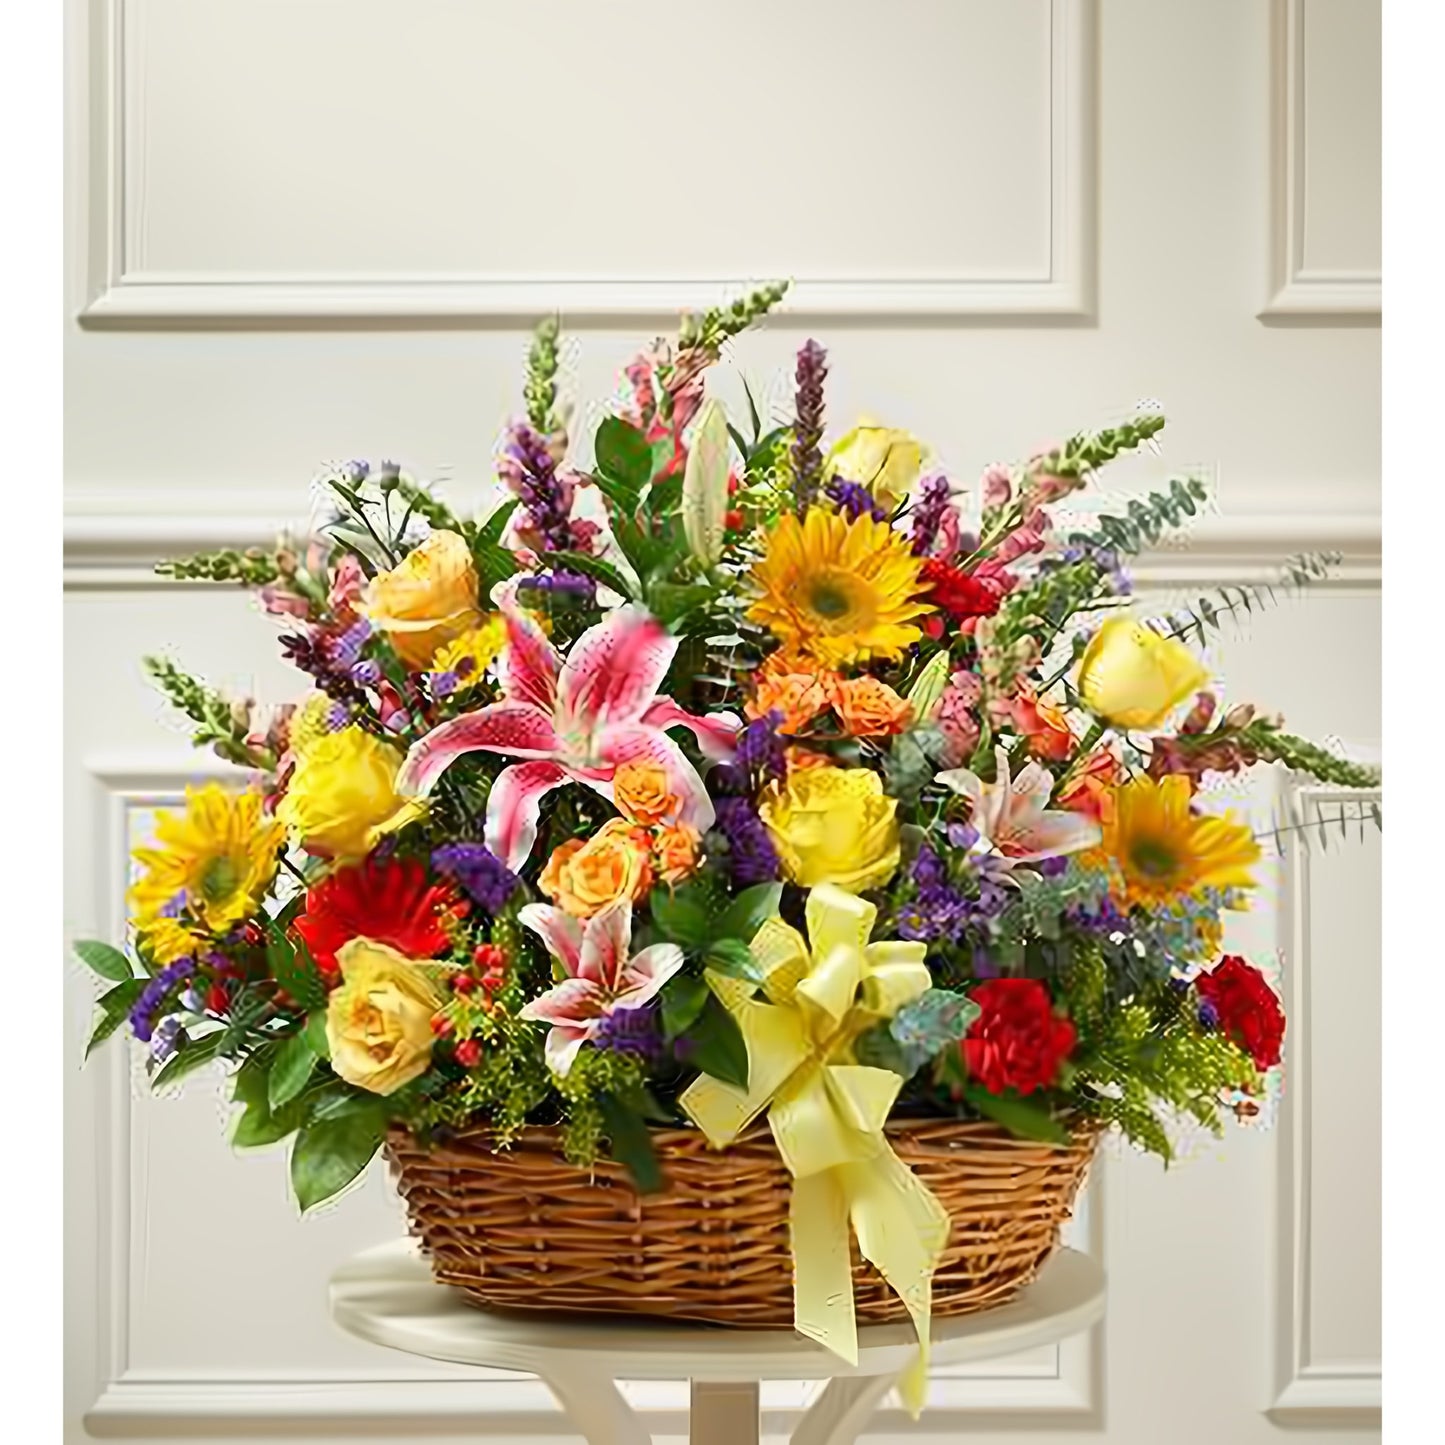 Bright Flower Sympathy Arrangement in Basket - Funeral > For the Service - Queens Flower Delivery